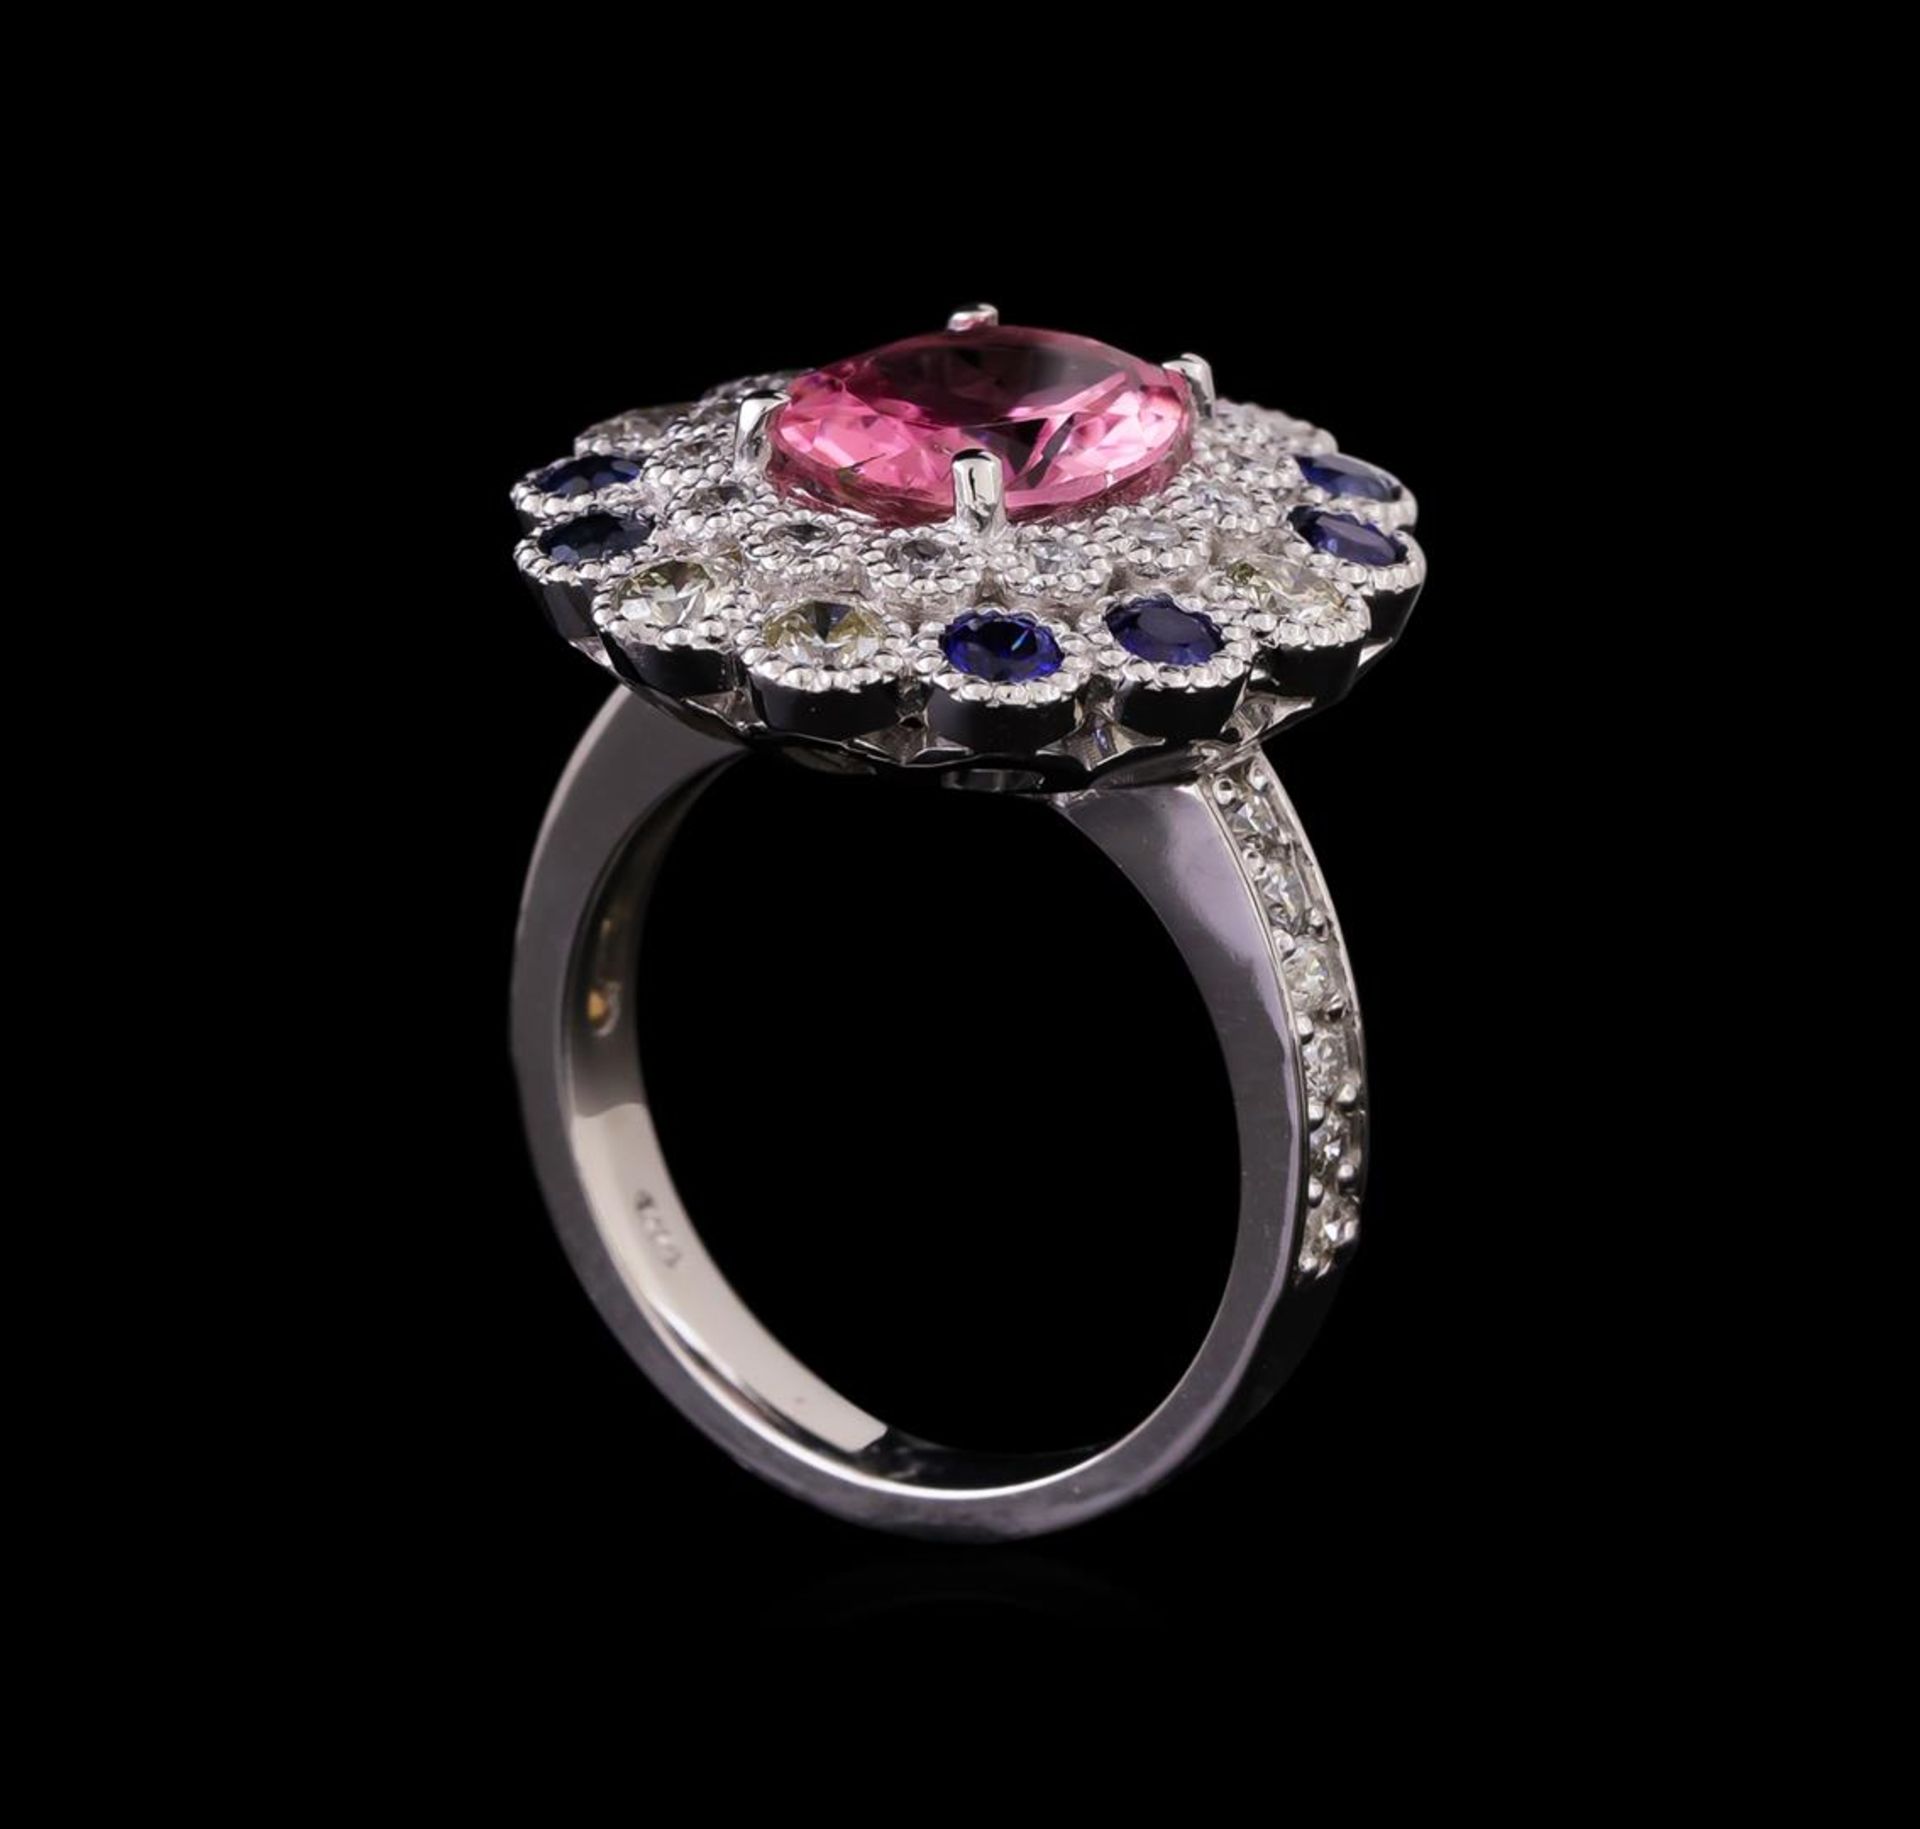 14KT White Gold 2.24 ctw Tourmaline, Sapphire and Diamond Ring - Image 4 of 5